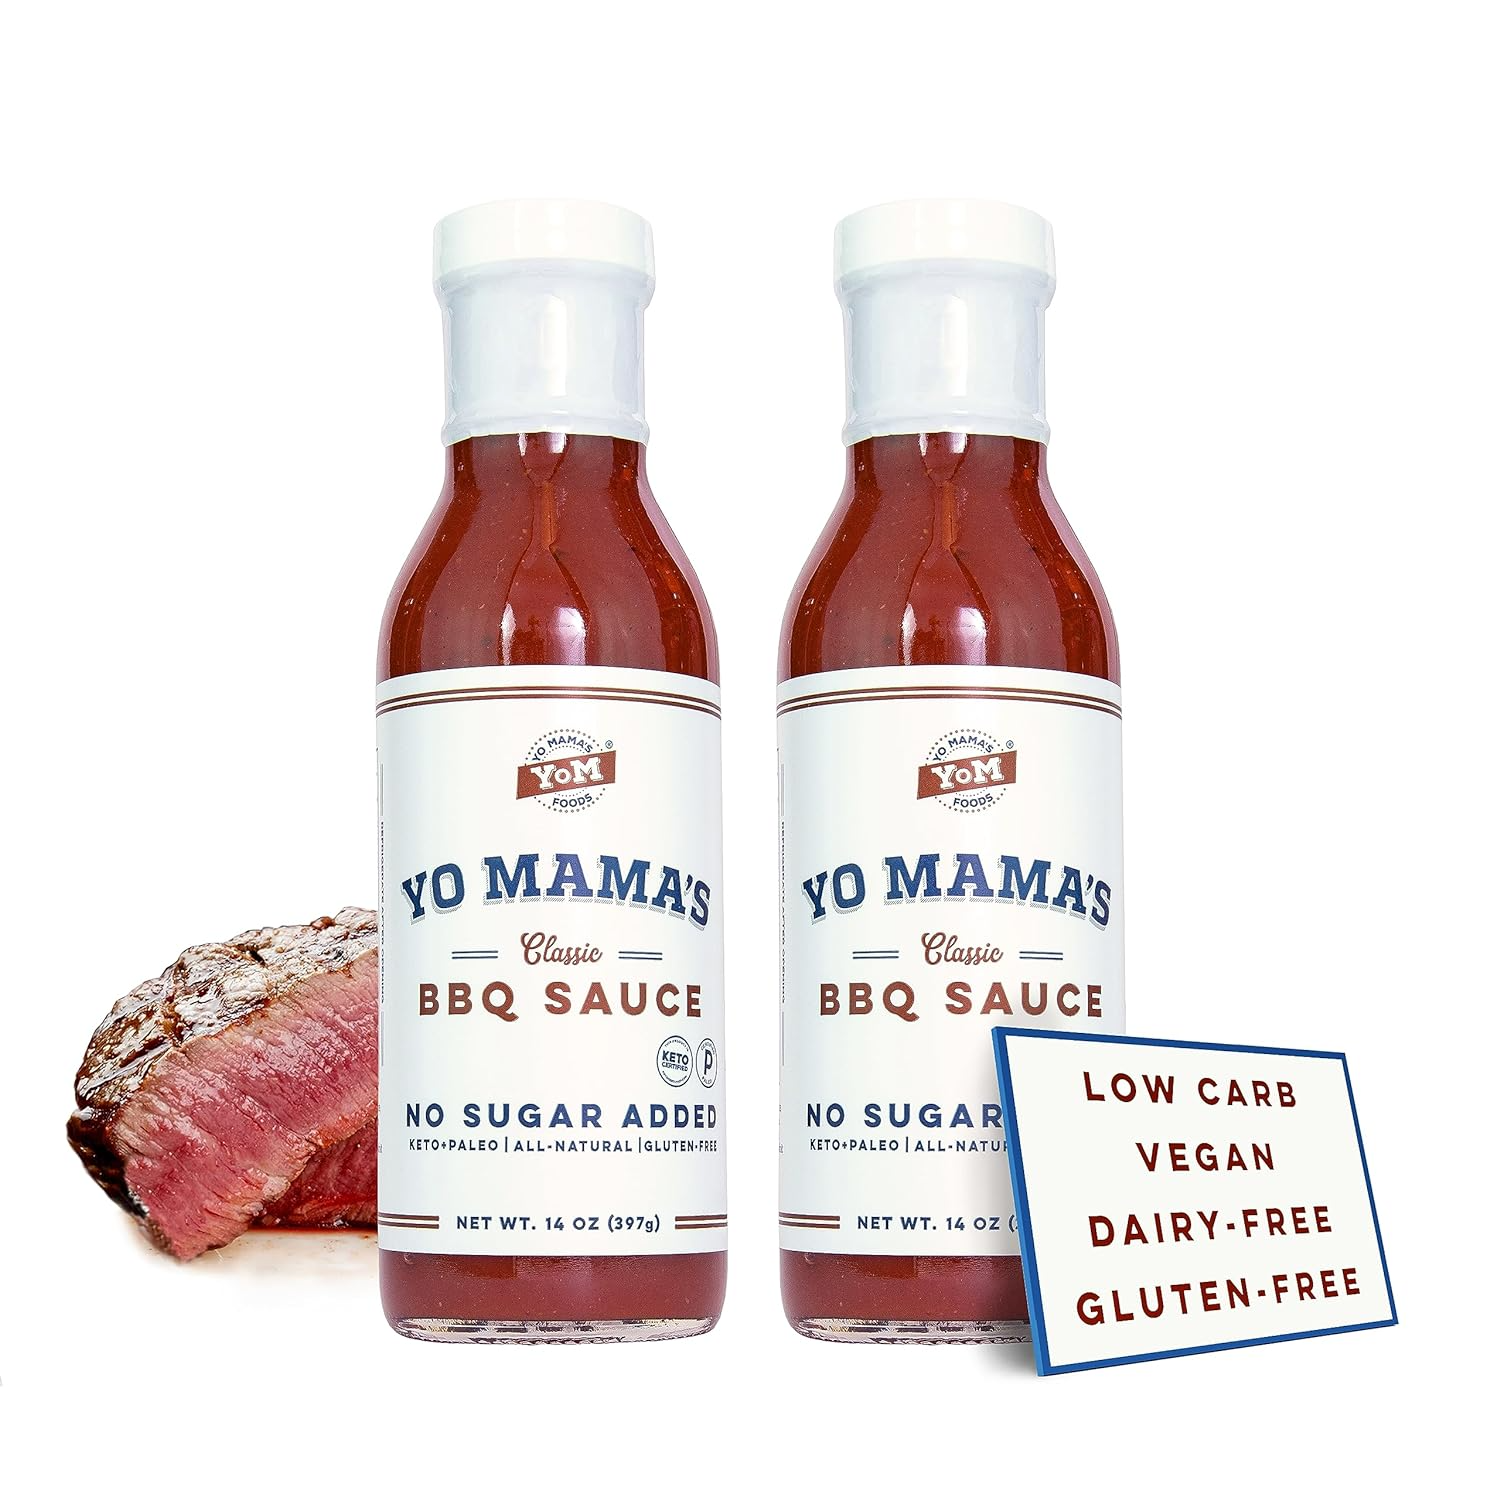 Yo Mama's Foods Keto Barbecue BBQ Sauce – (Pack of 2) - Vegan, No Sugar Added, Low Carb, Low Sodium, Gluten Free, Paleo, and Made with Whole Non-GMO Tomatoes! - Barbecue Whizz...Watch My Smoke!